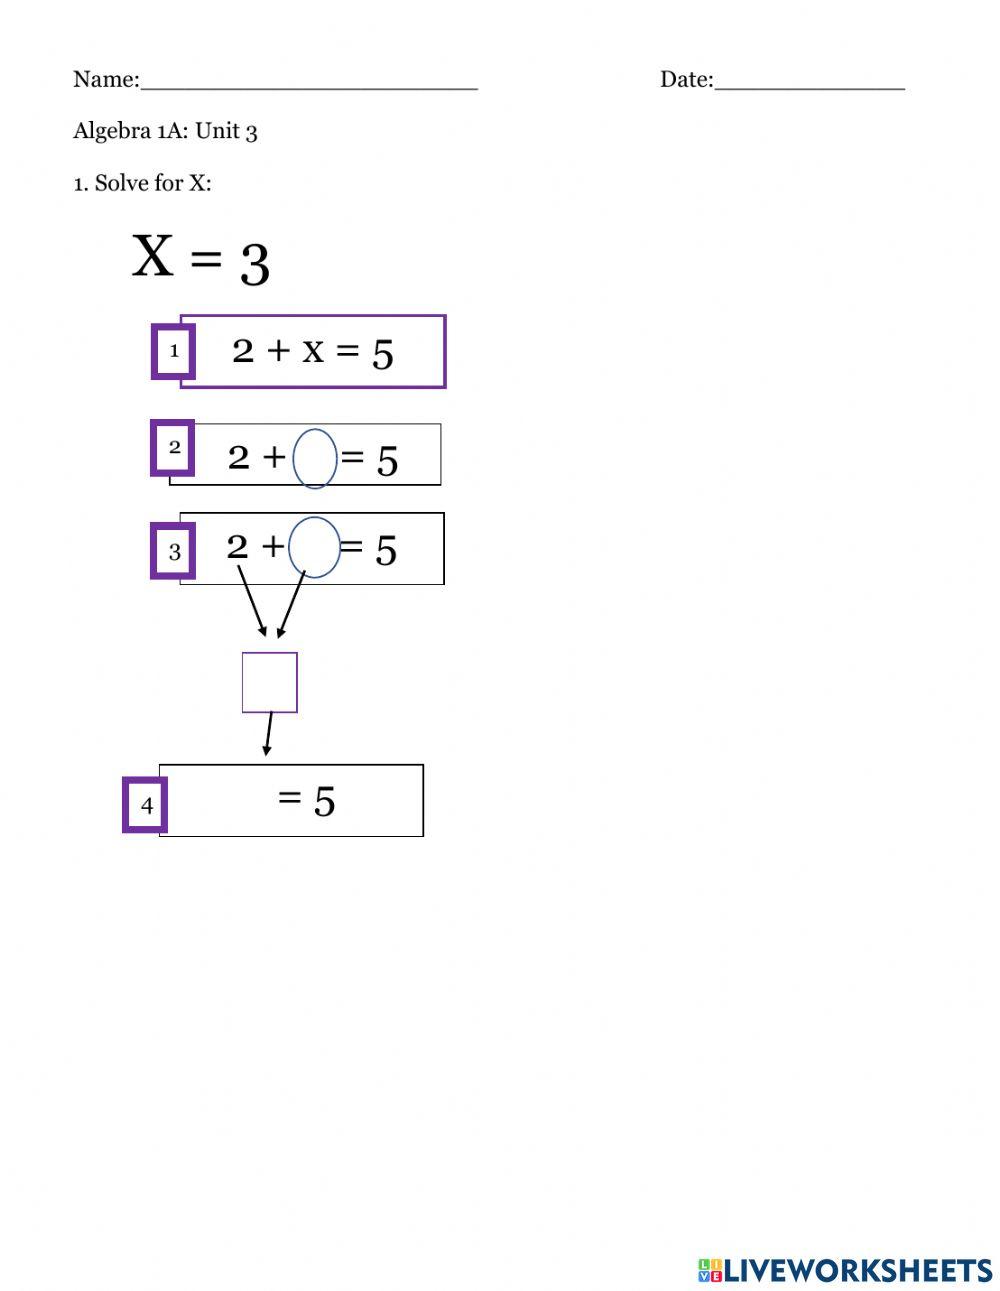 Solve Equations by Replacing X